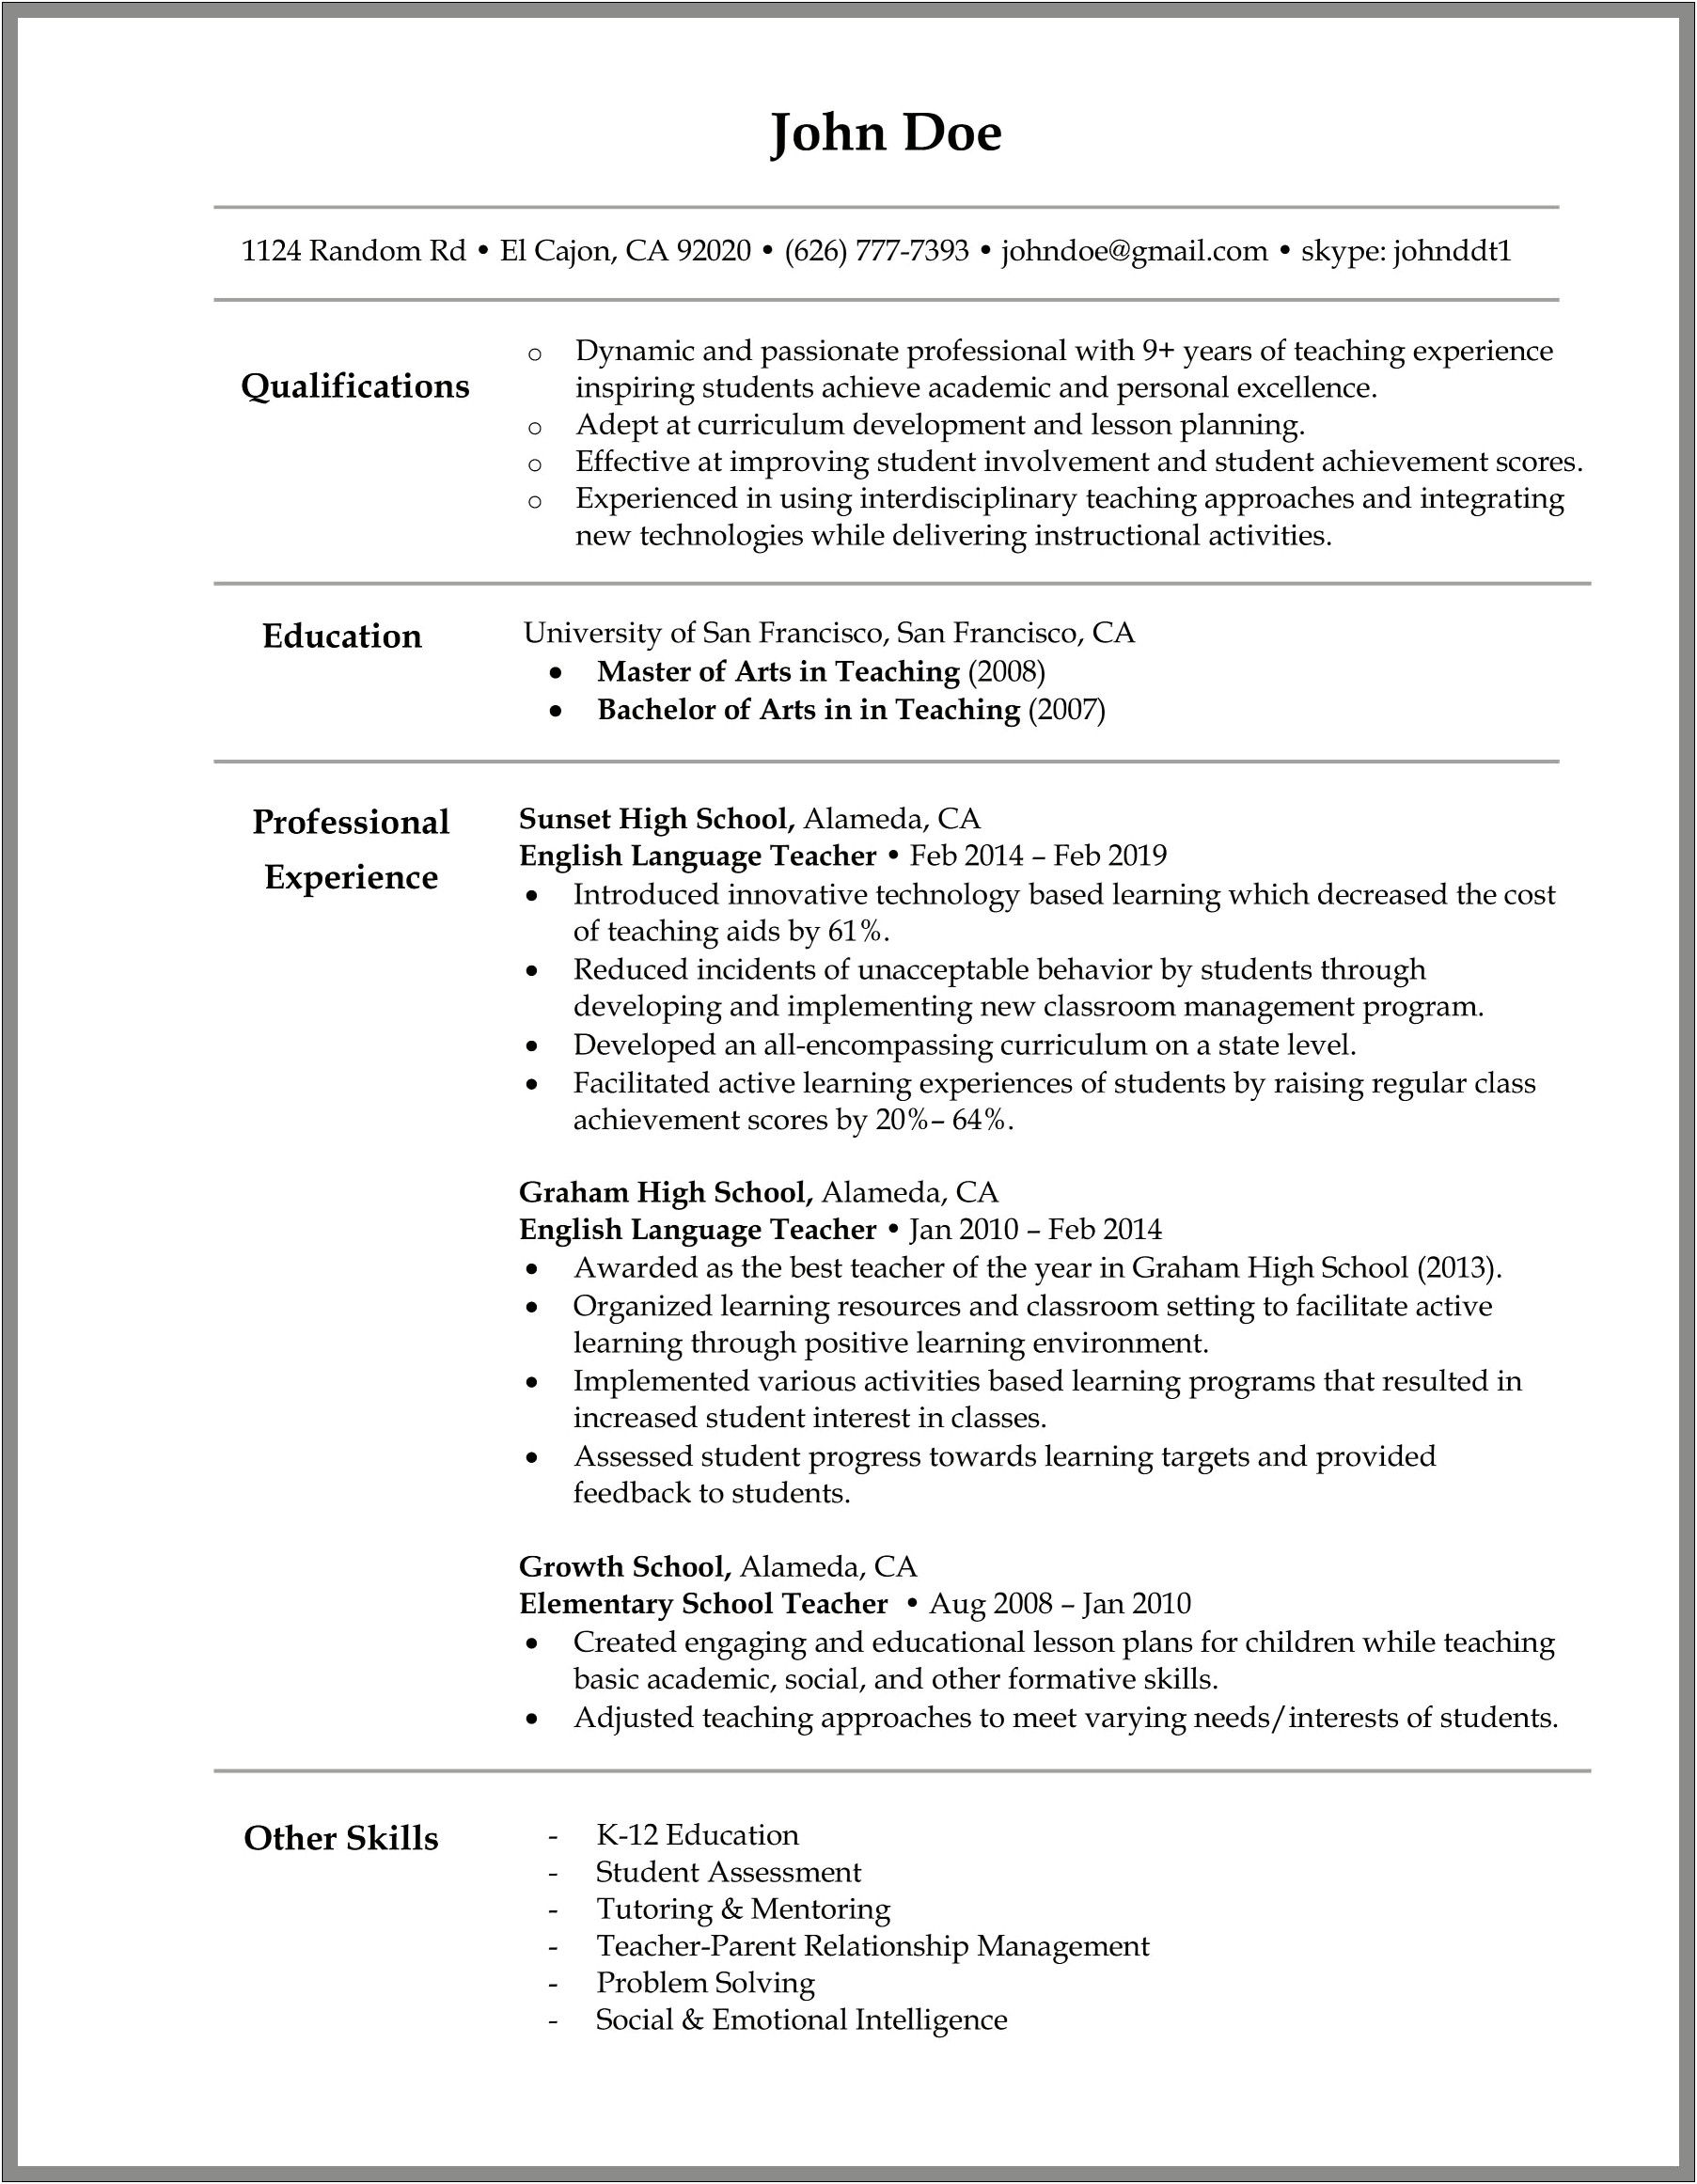 Evaluating Resumes Activities For High School Students